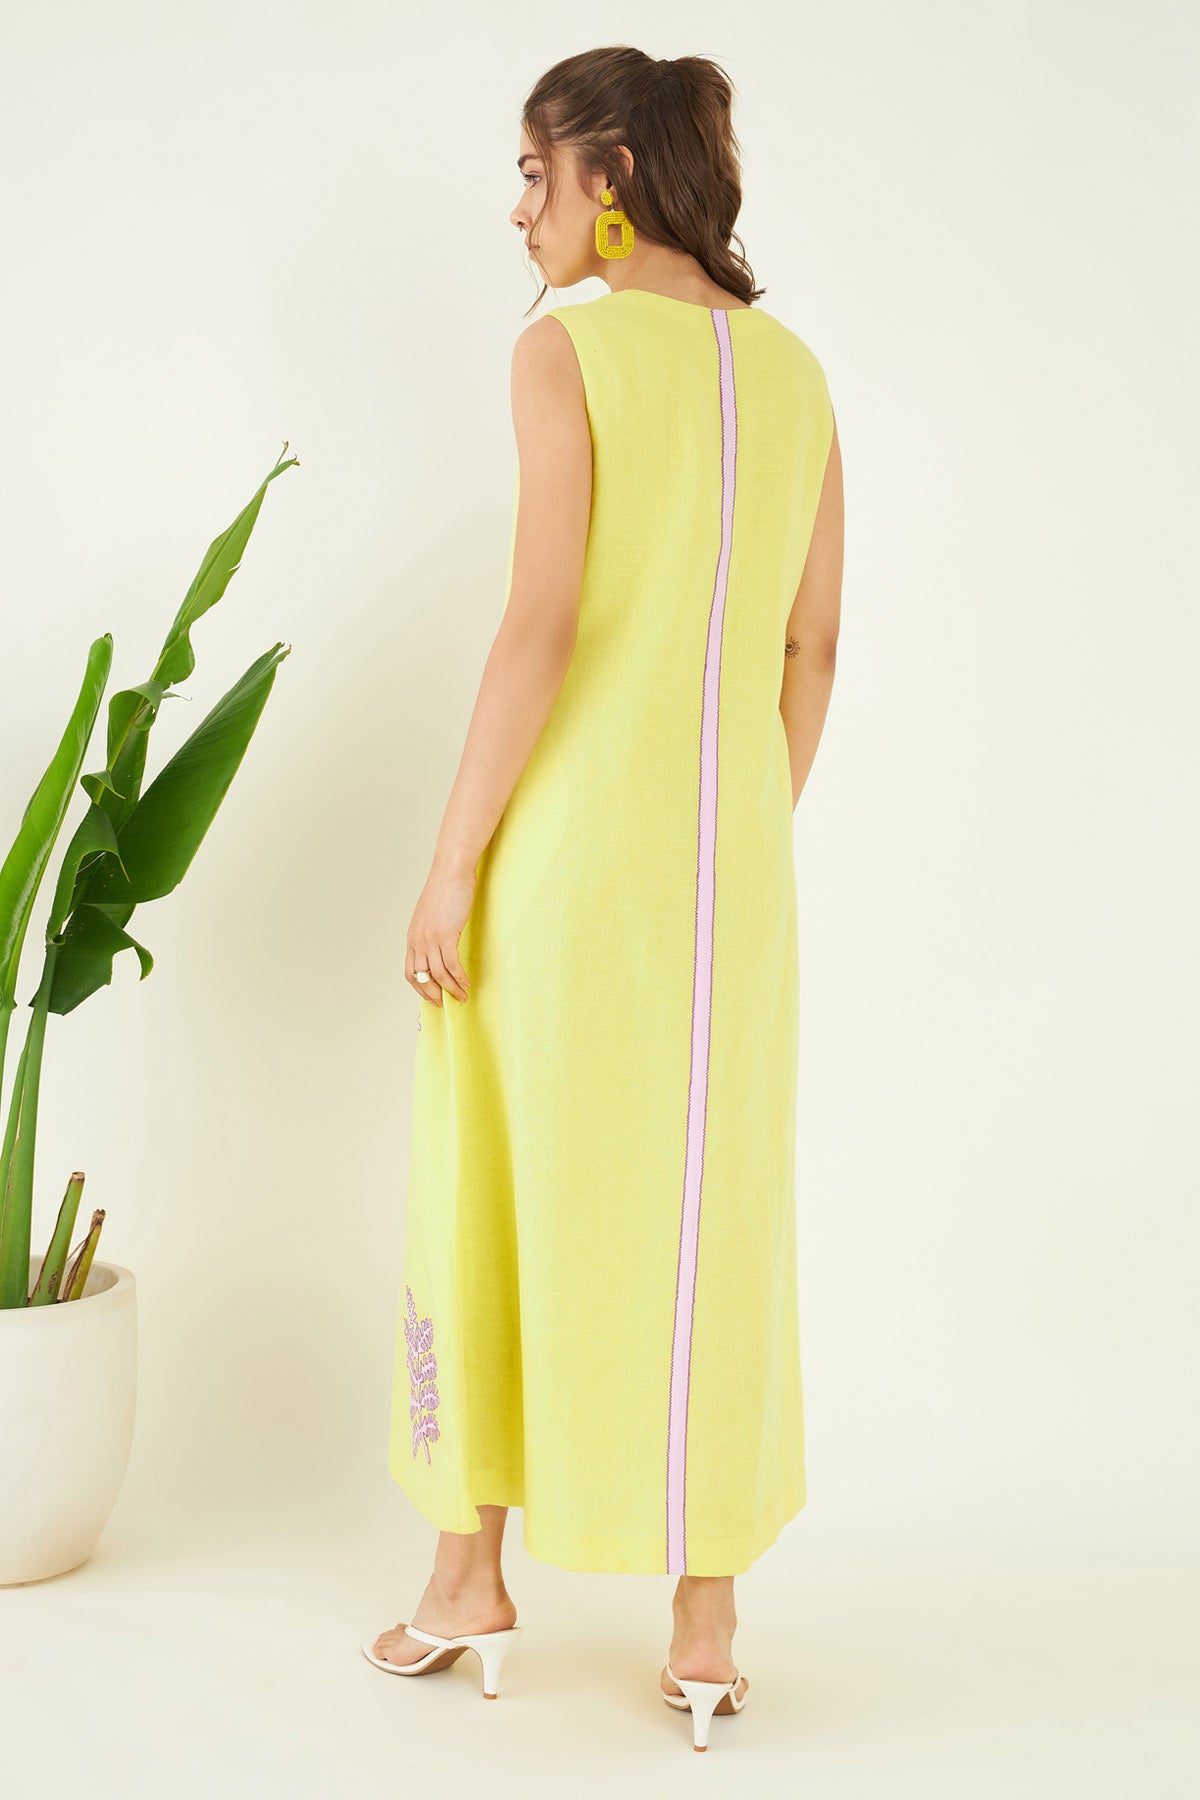 Embroidered Yellow Linen Dress